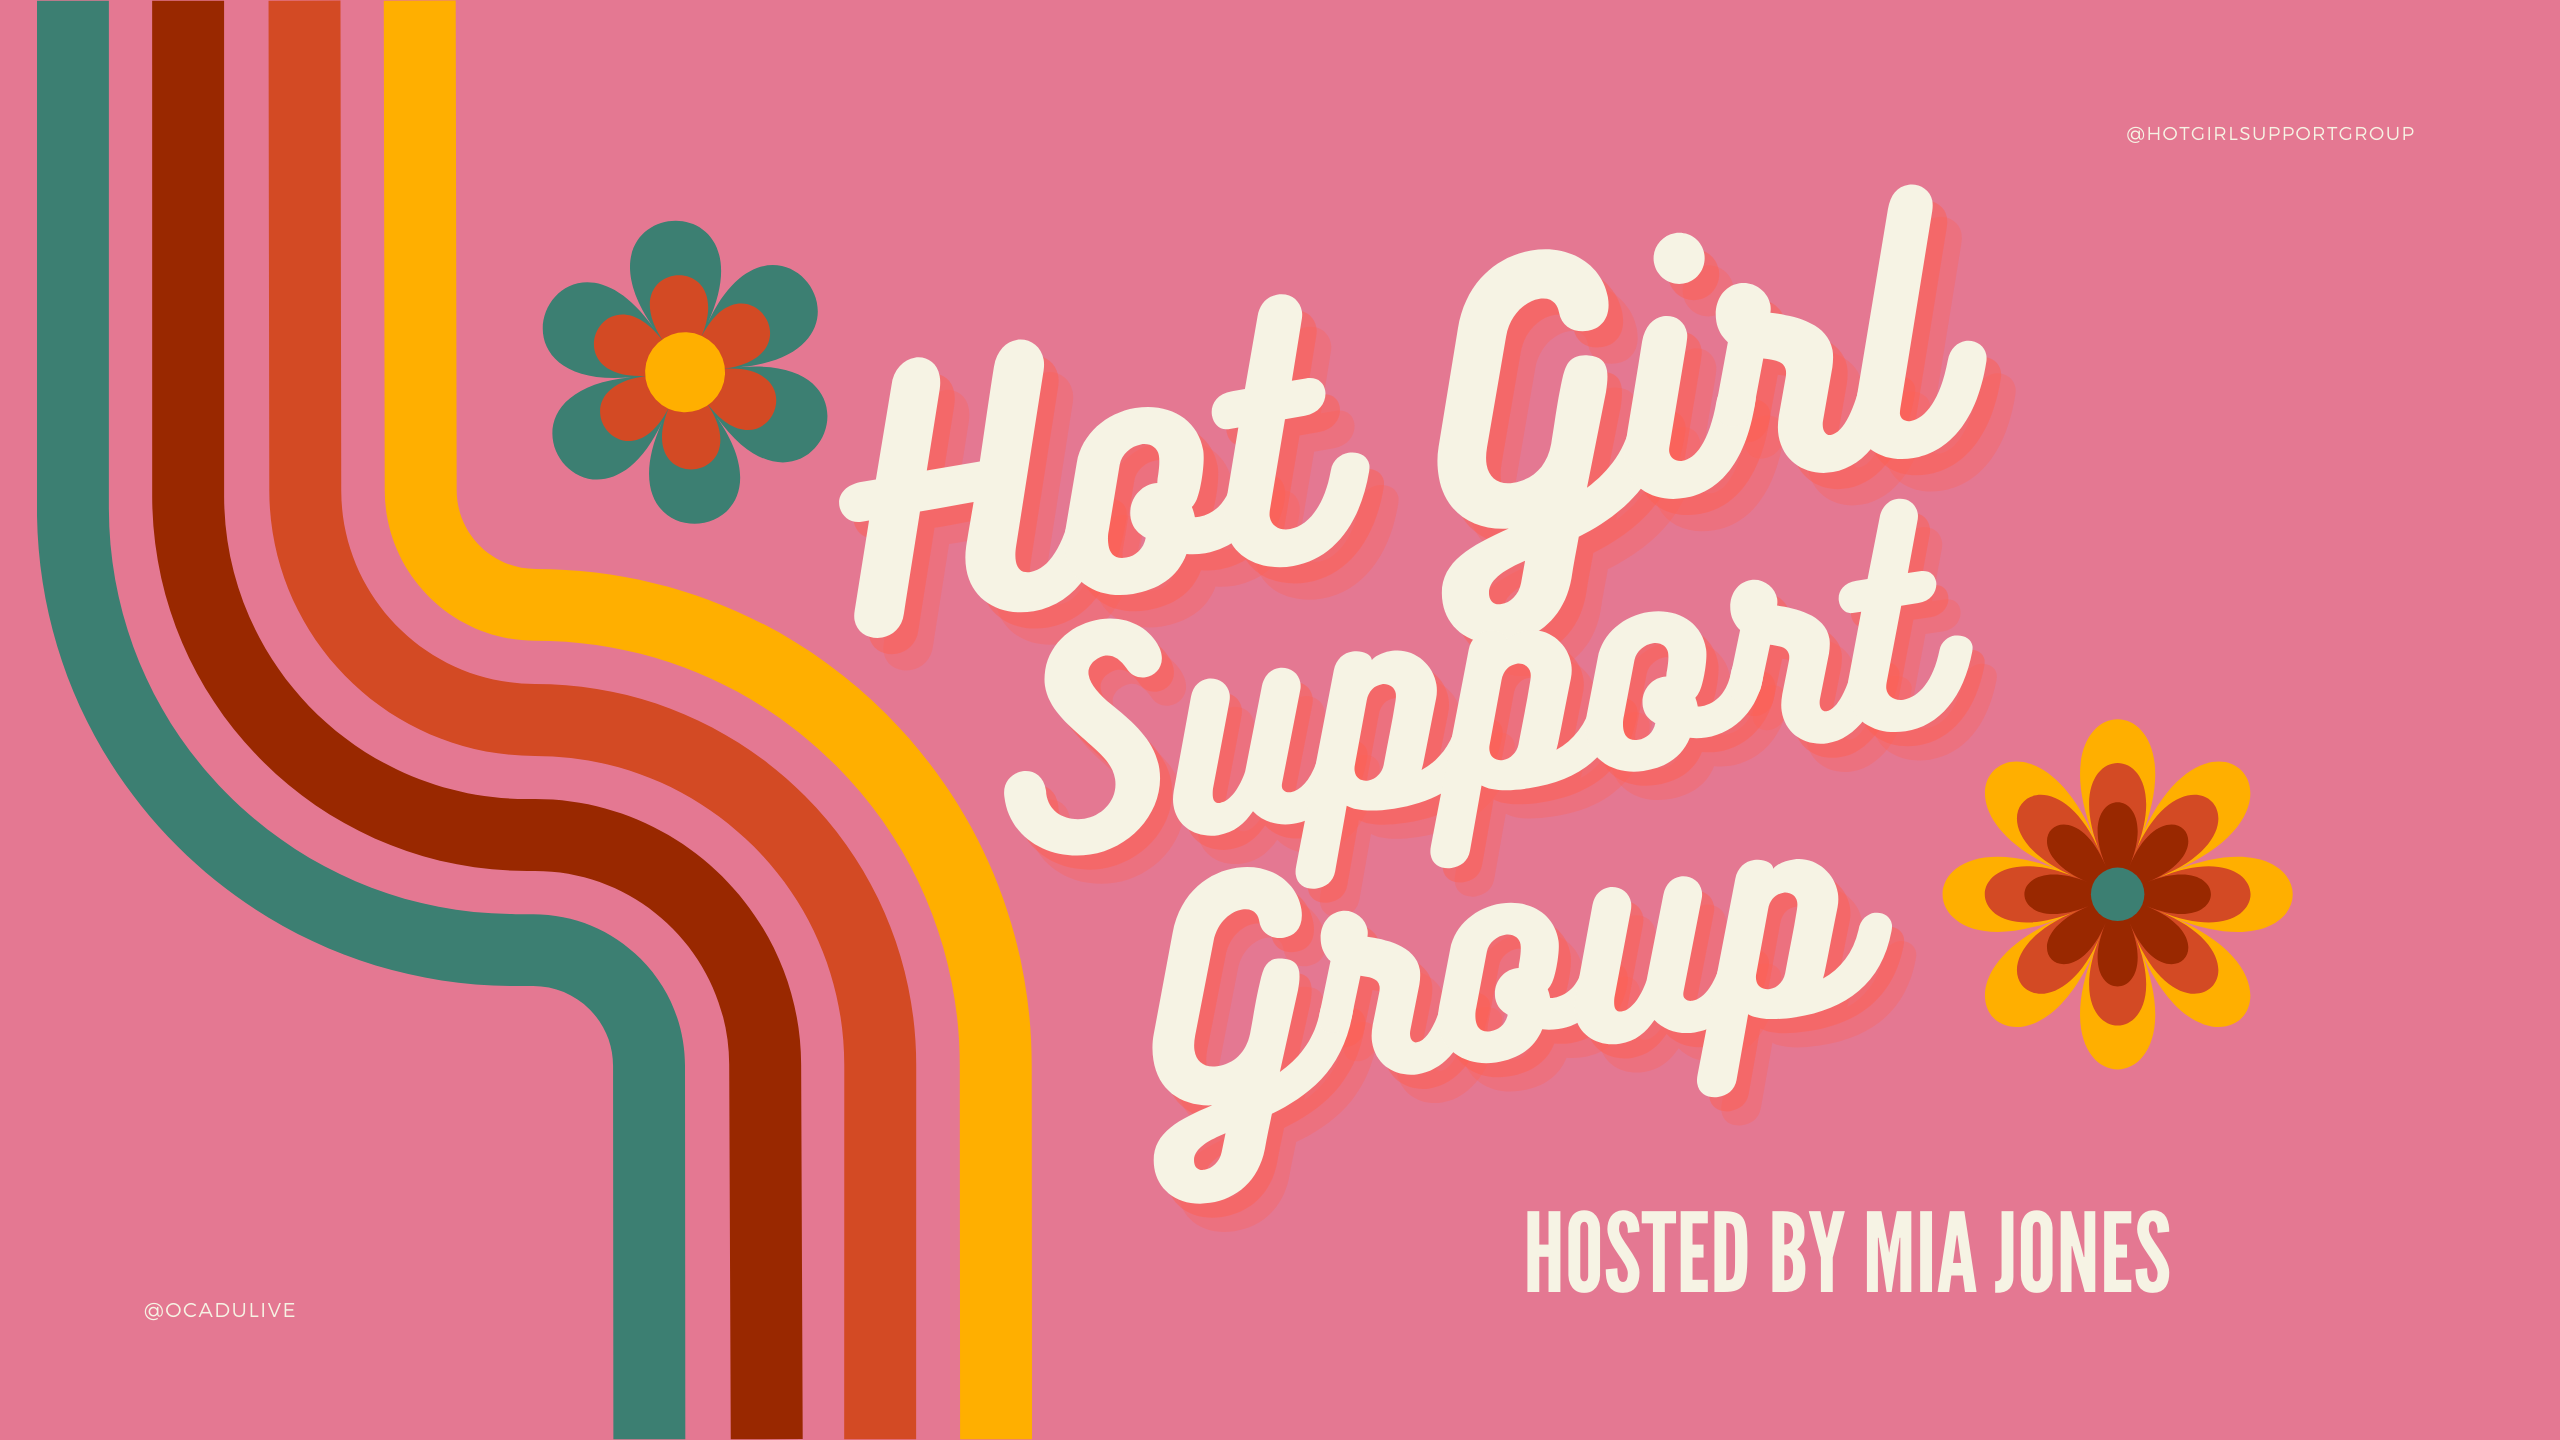 Hot Girl Support Group